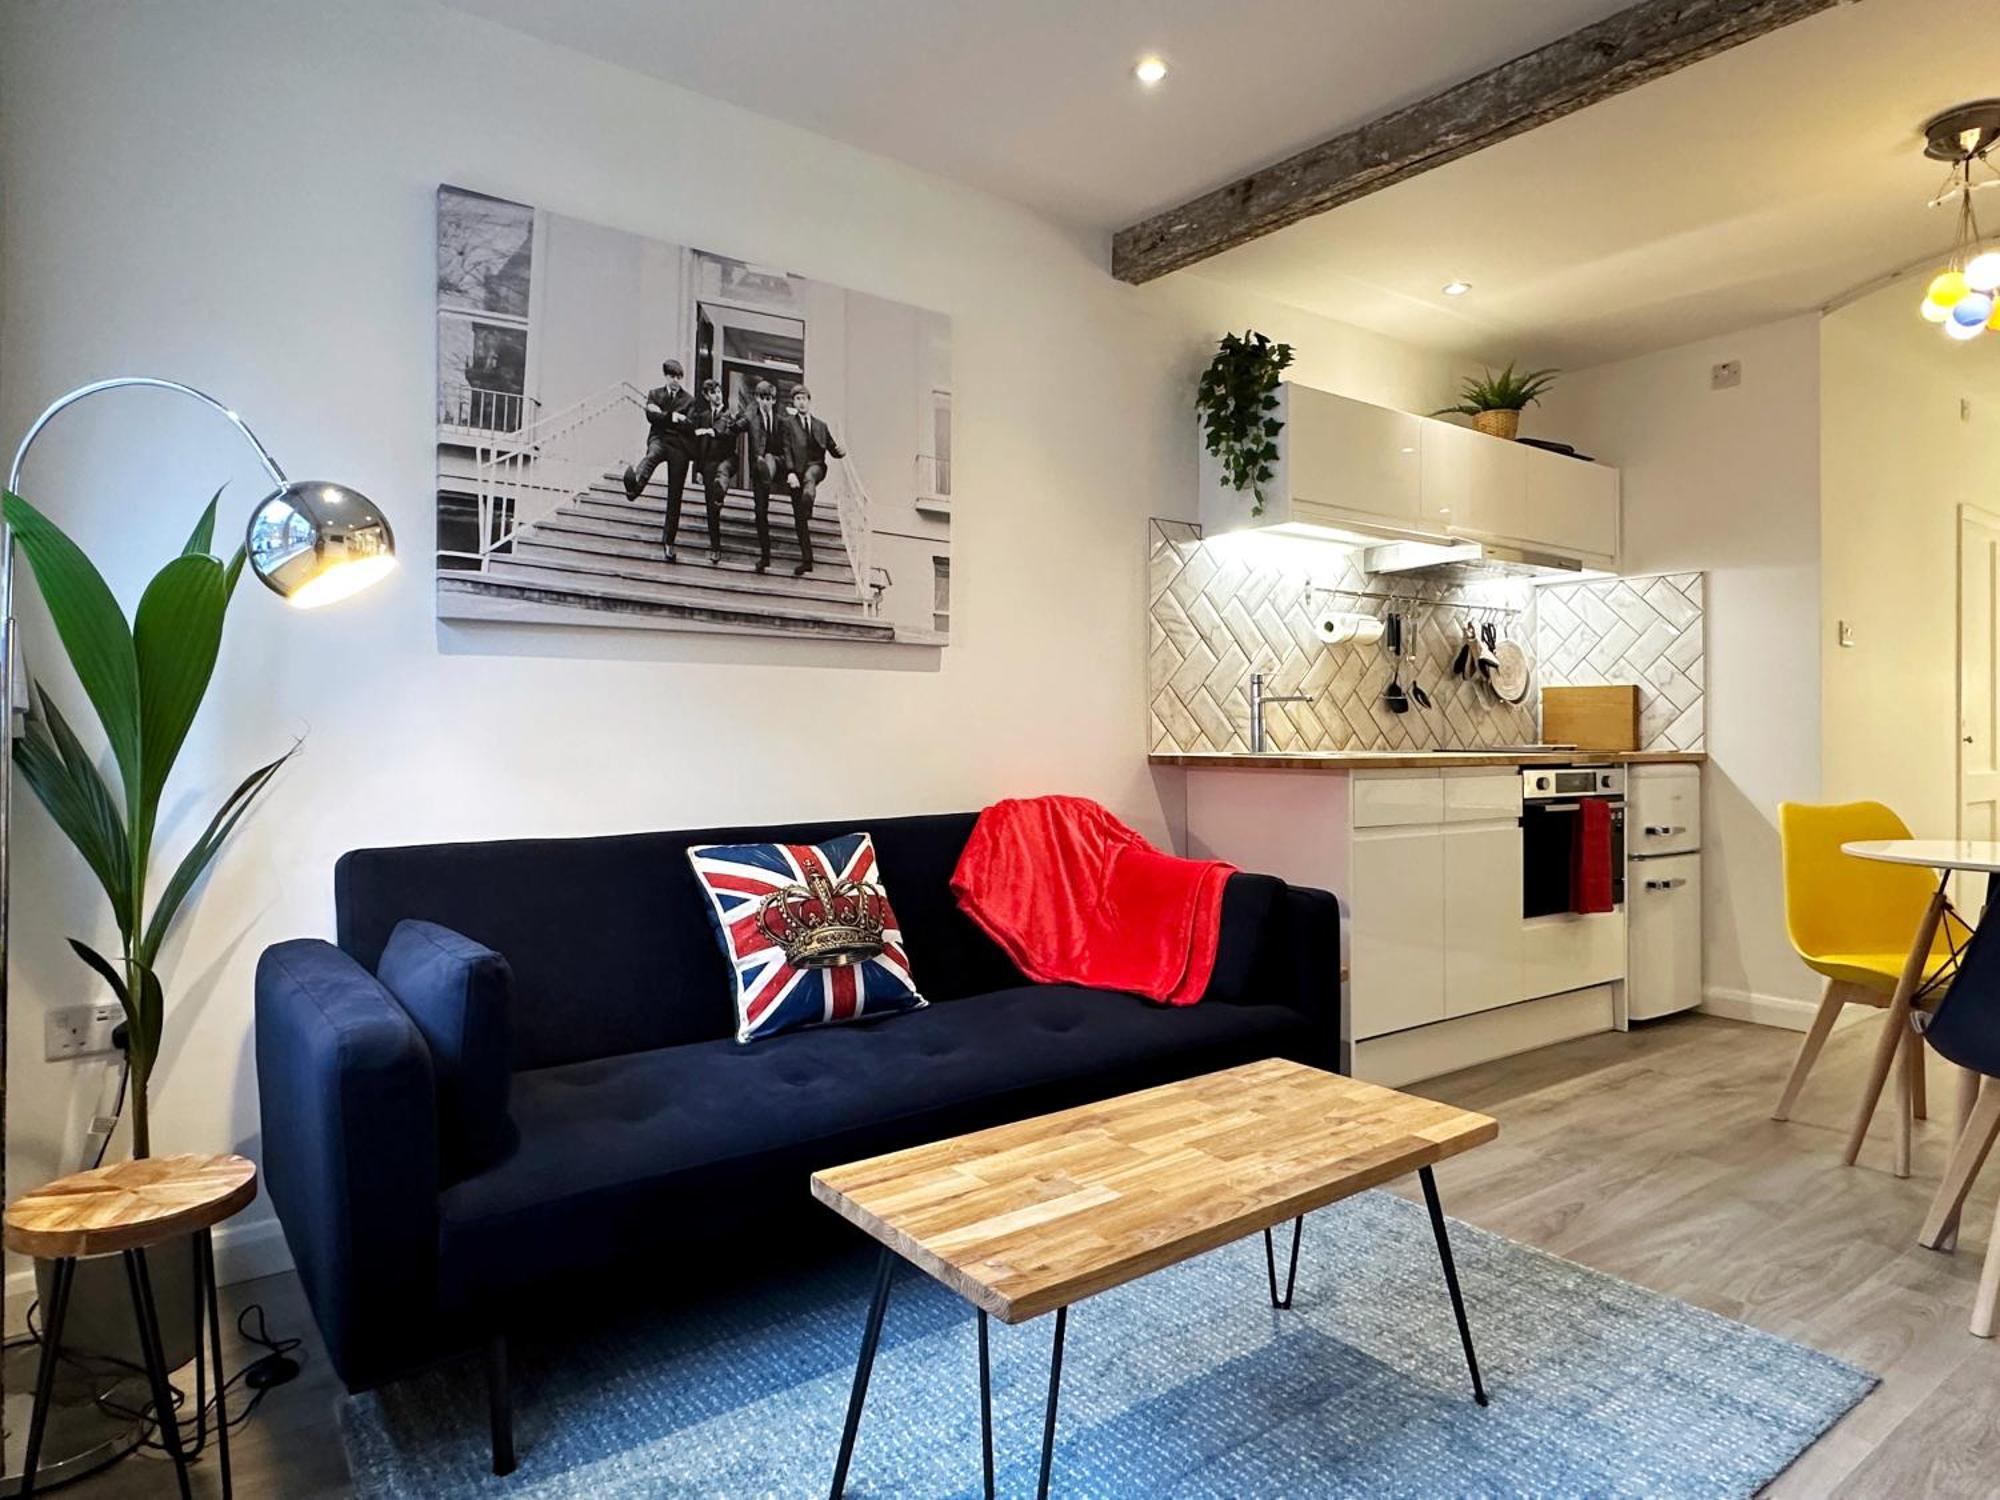 Kensington Studio Hosted By Airoperate Near Notting Hill - 1 Double Bed , 1 Sofa Bed, Ground Floor Apartment Via Private Entrance 伦敦 外观 照片